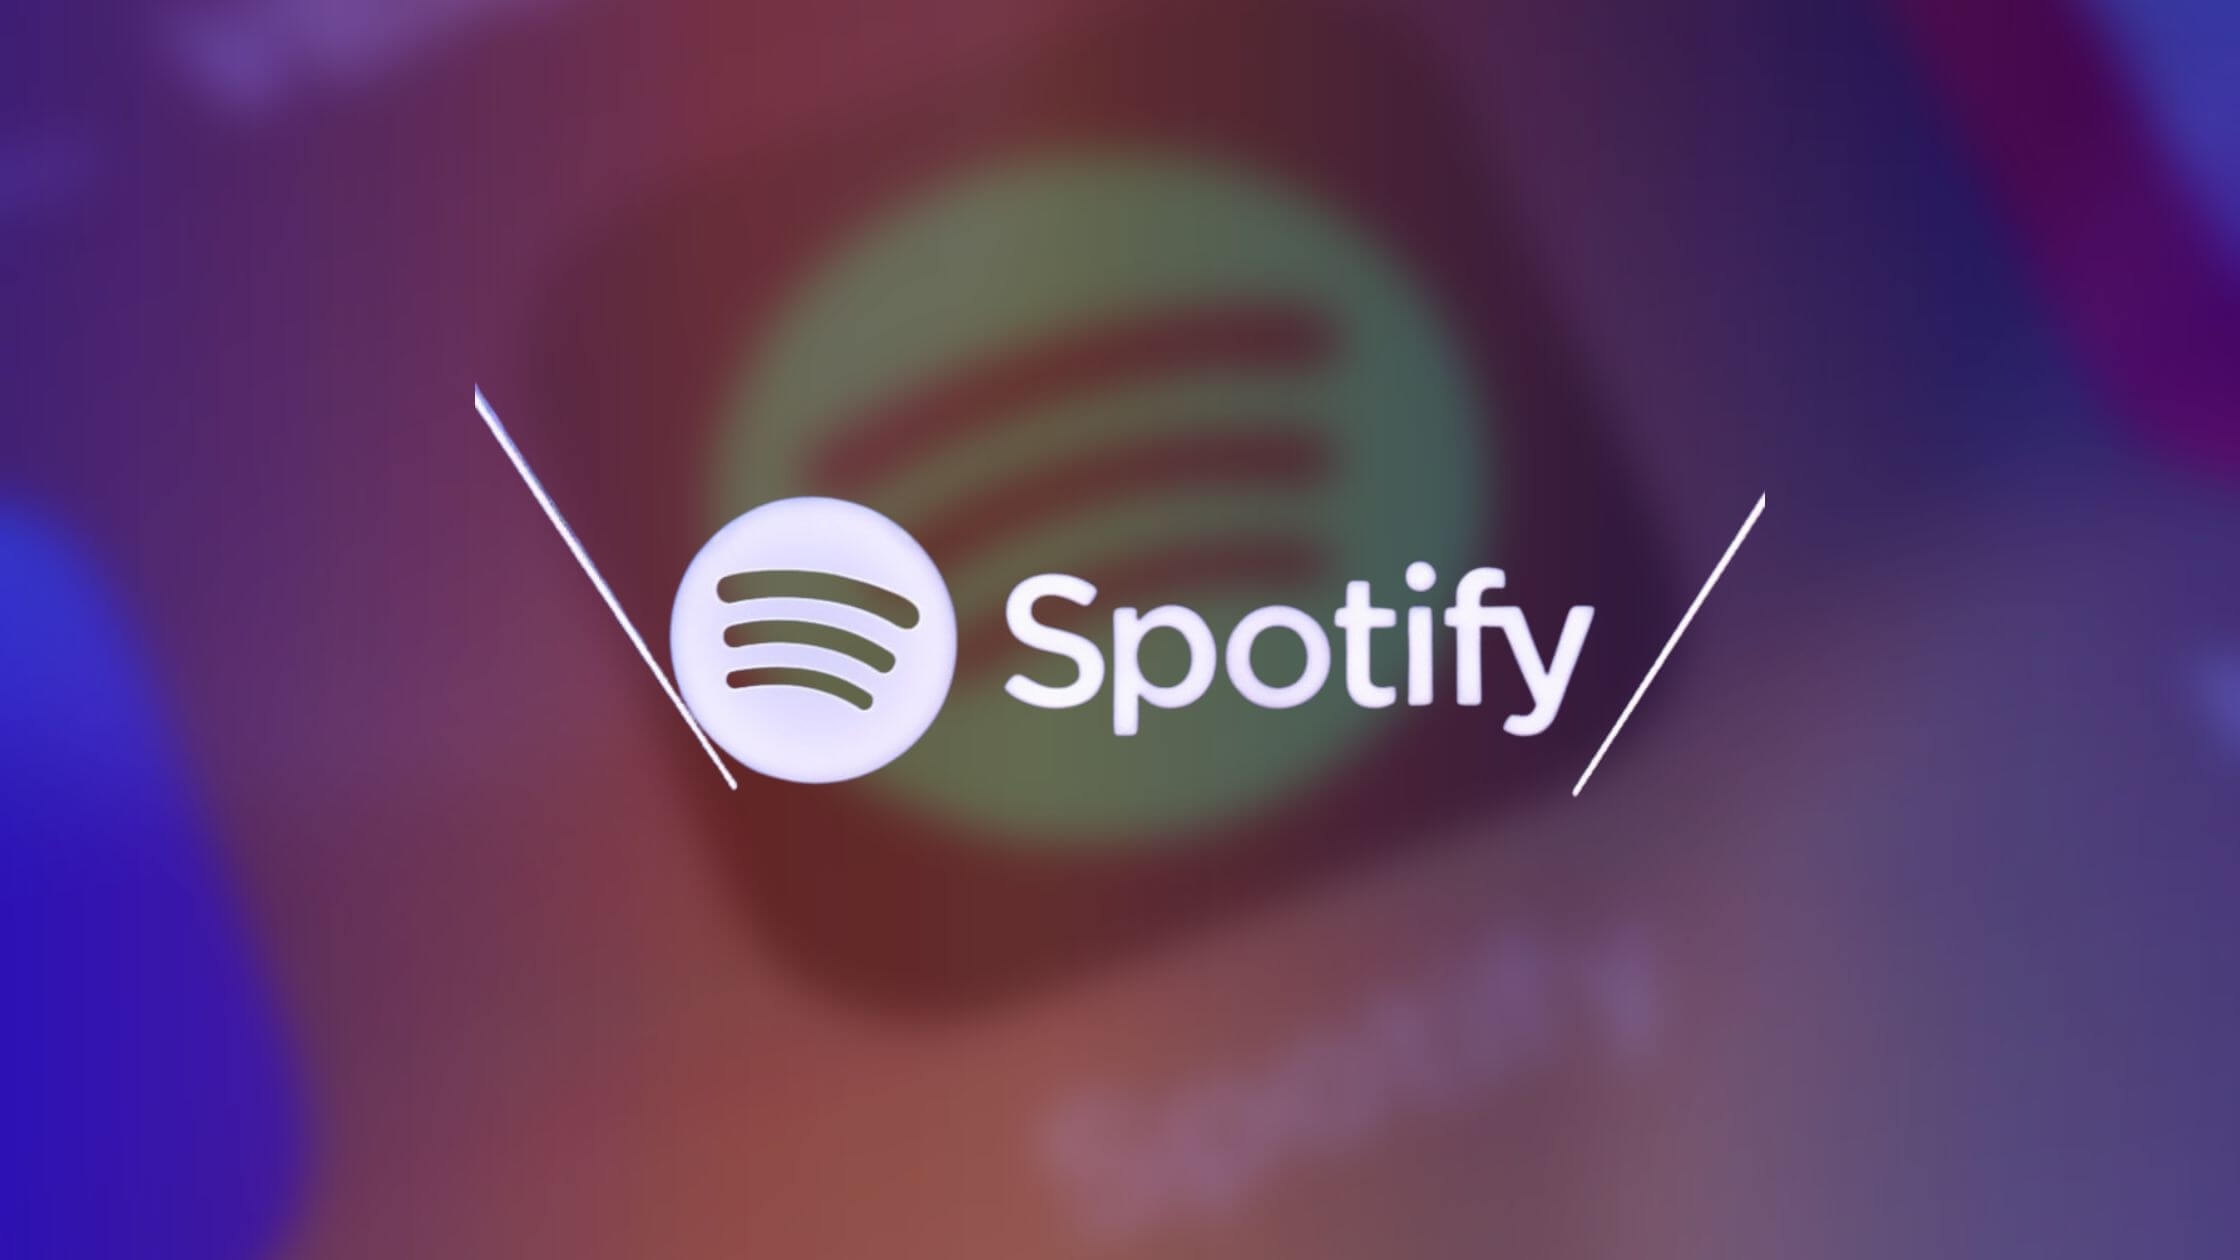 You can now download Spotify on the Epic Games Store - RouteNote Blog